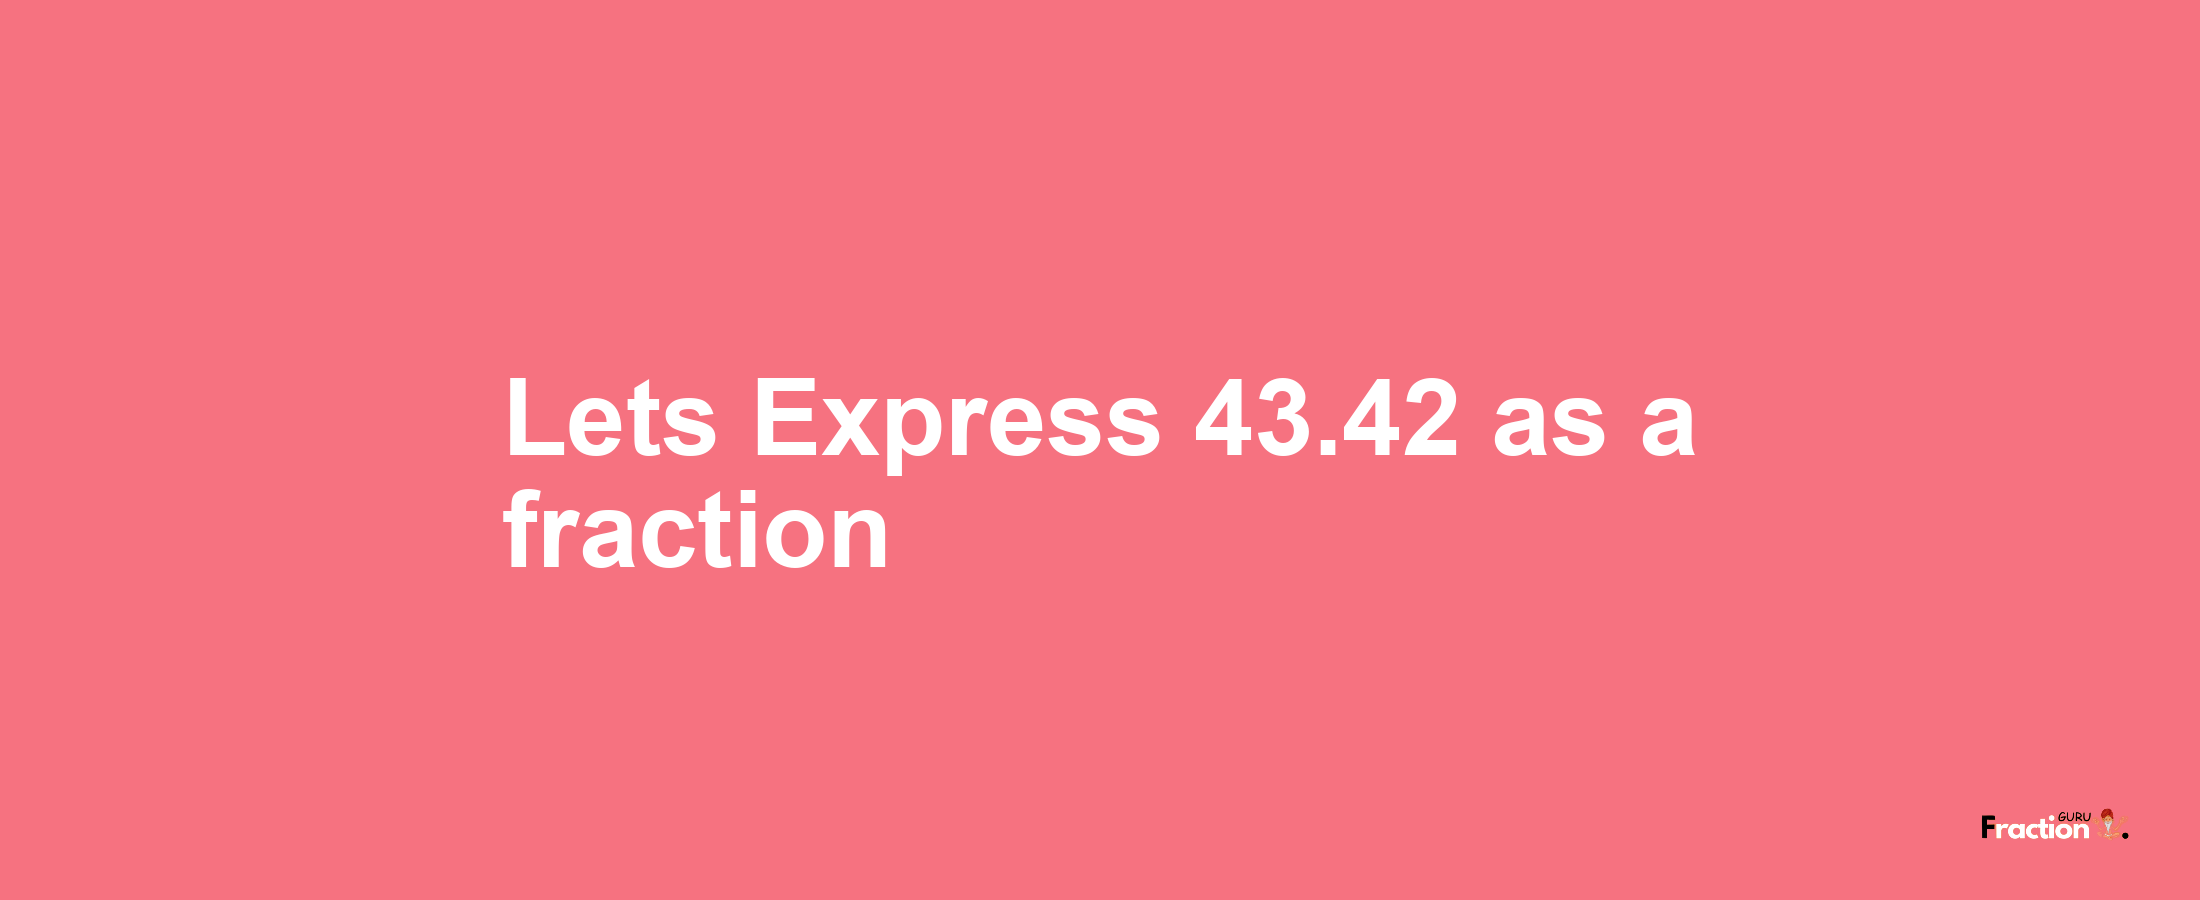 Lets Express 43.42 as afraction